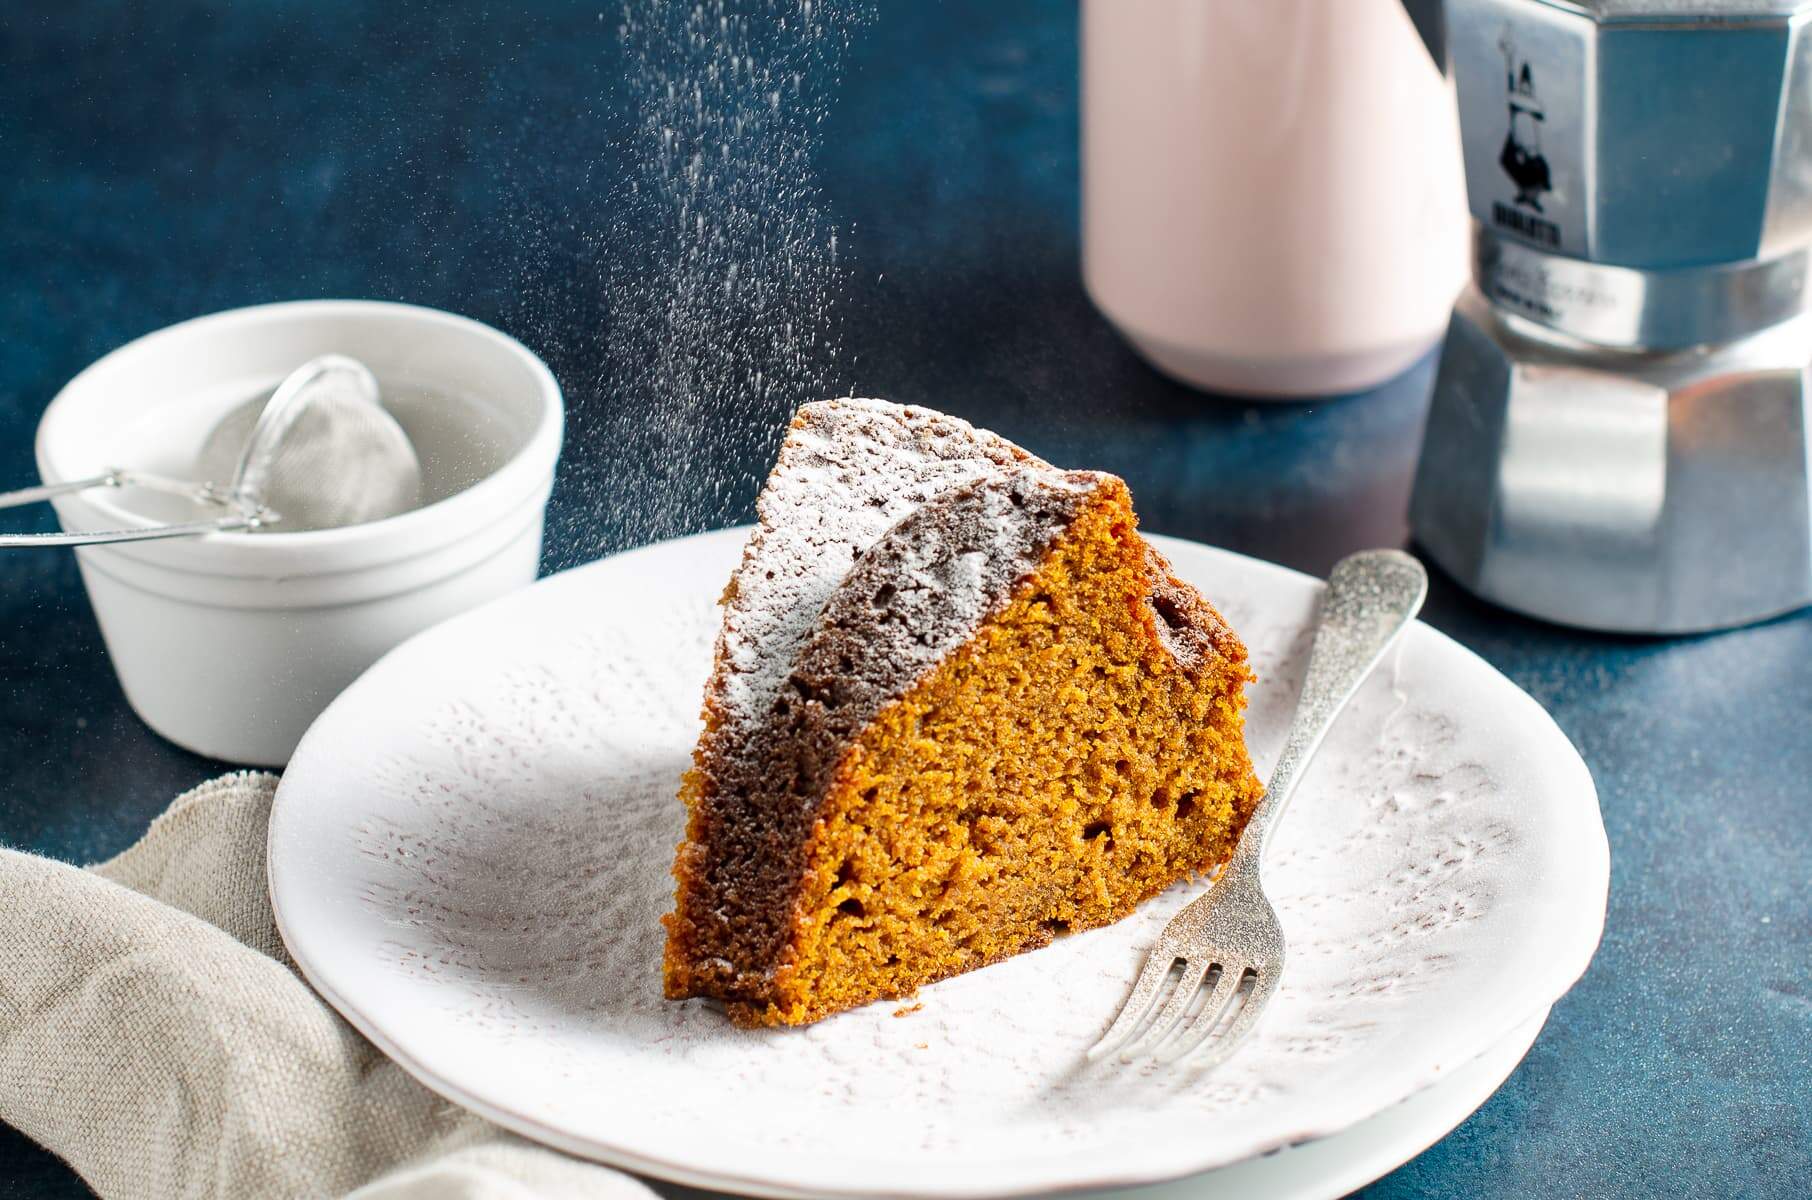 A slice of pumpkin cake with sugar being dusted over the top served with a cup of coffee.